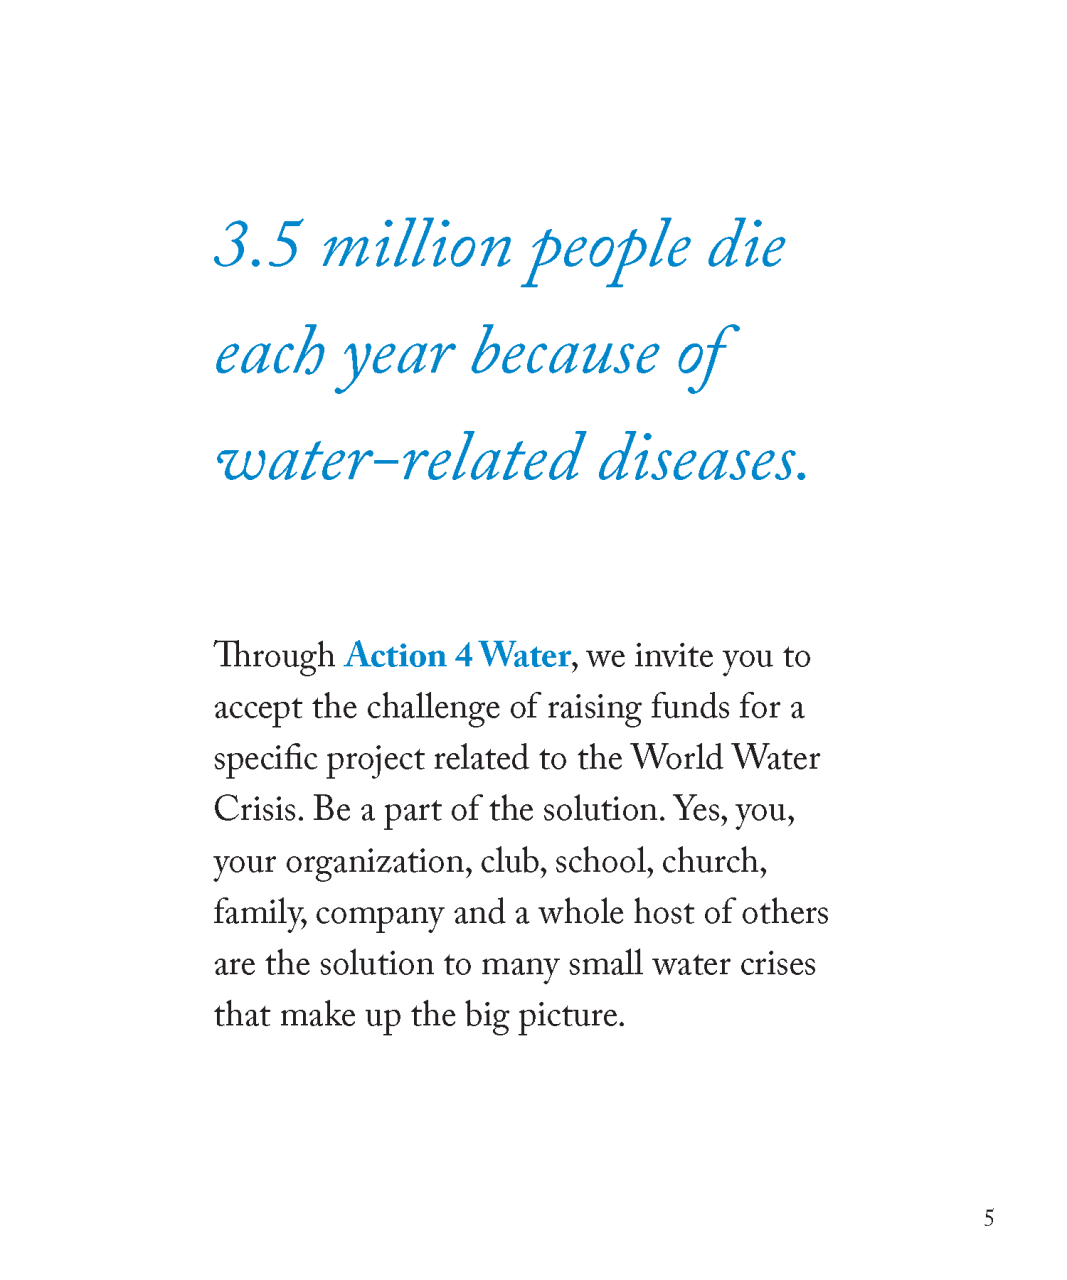 Walk for Water Project